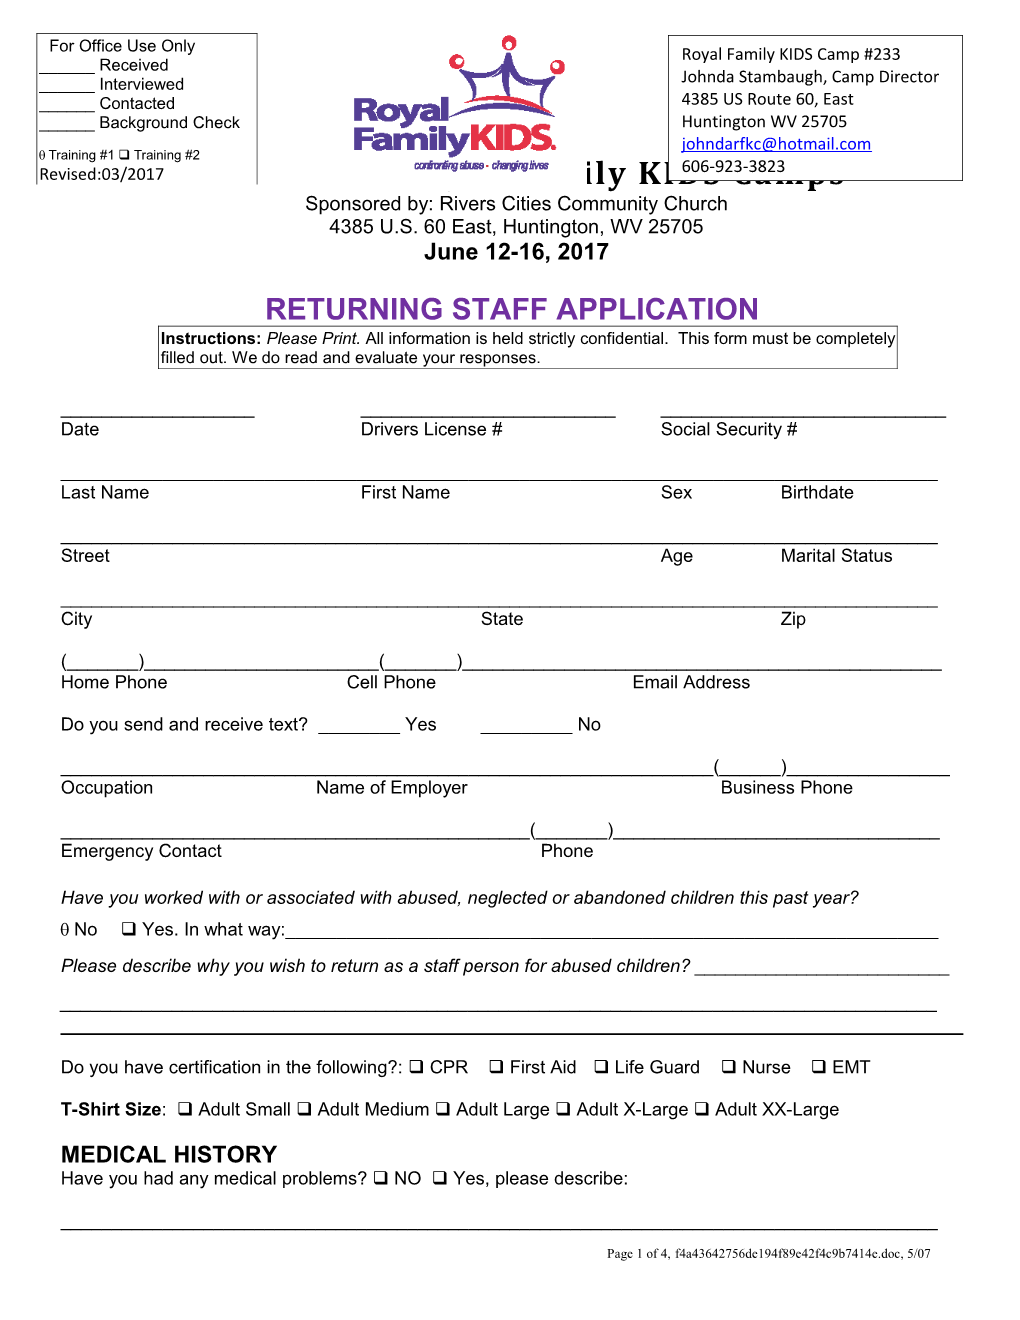 Royal Family Returning Counselor Application